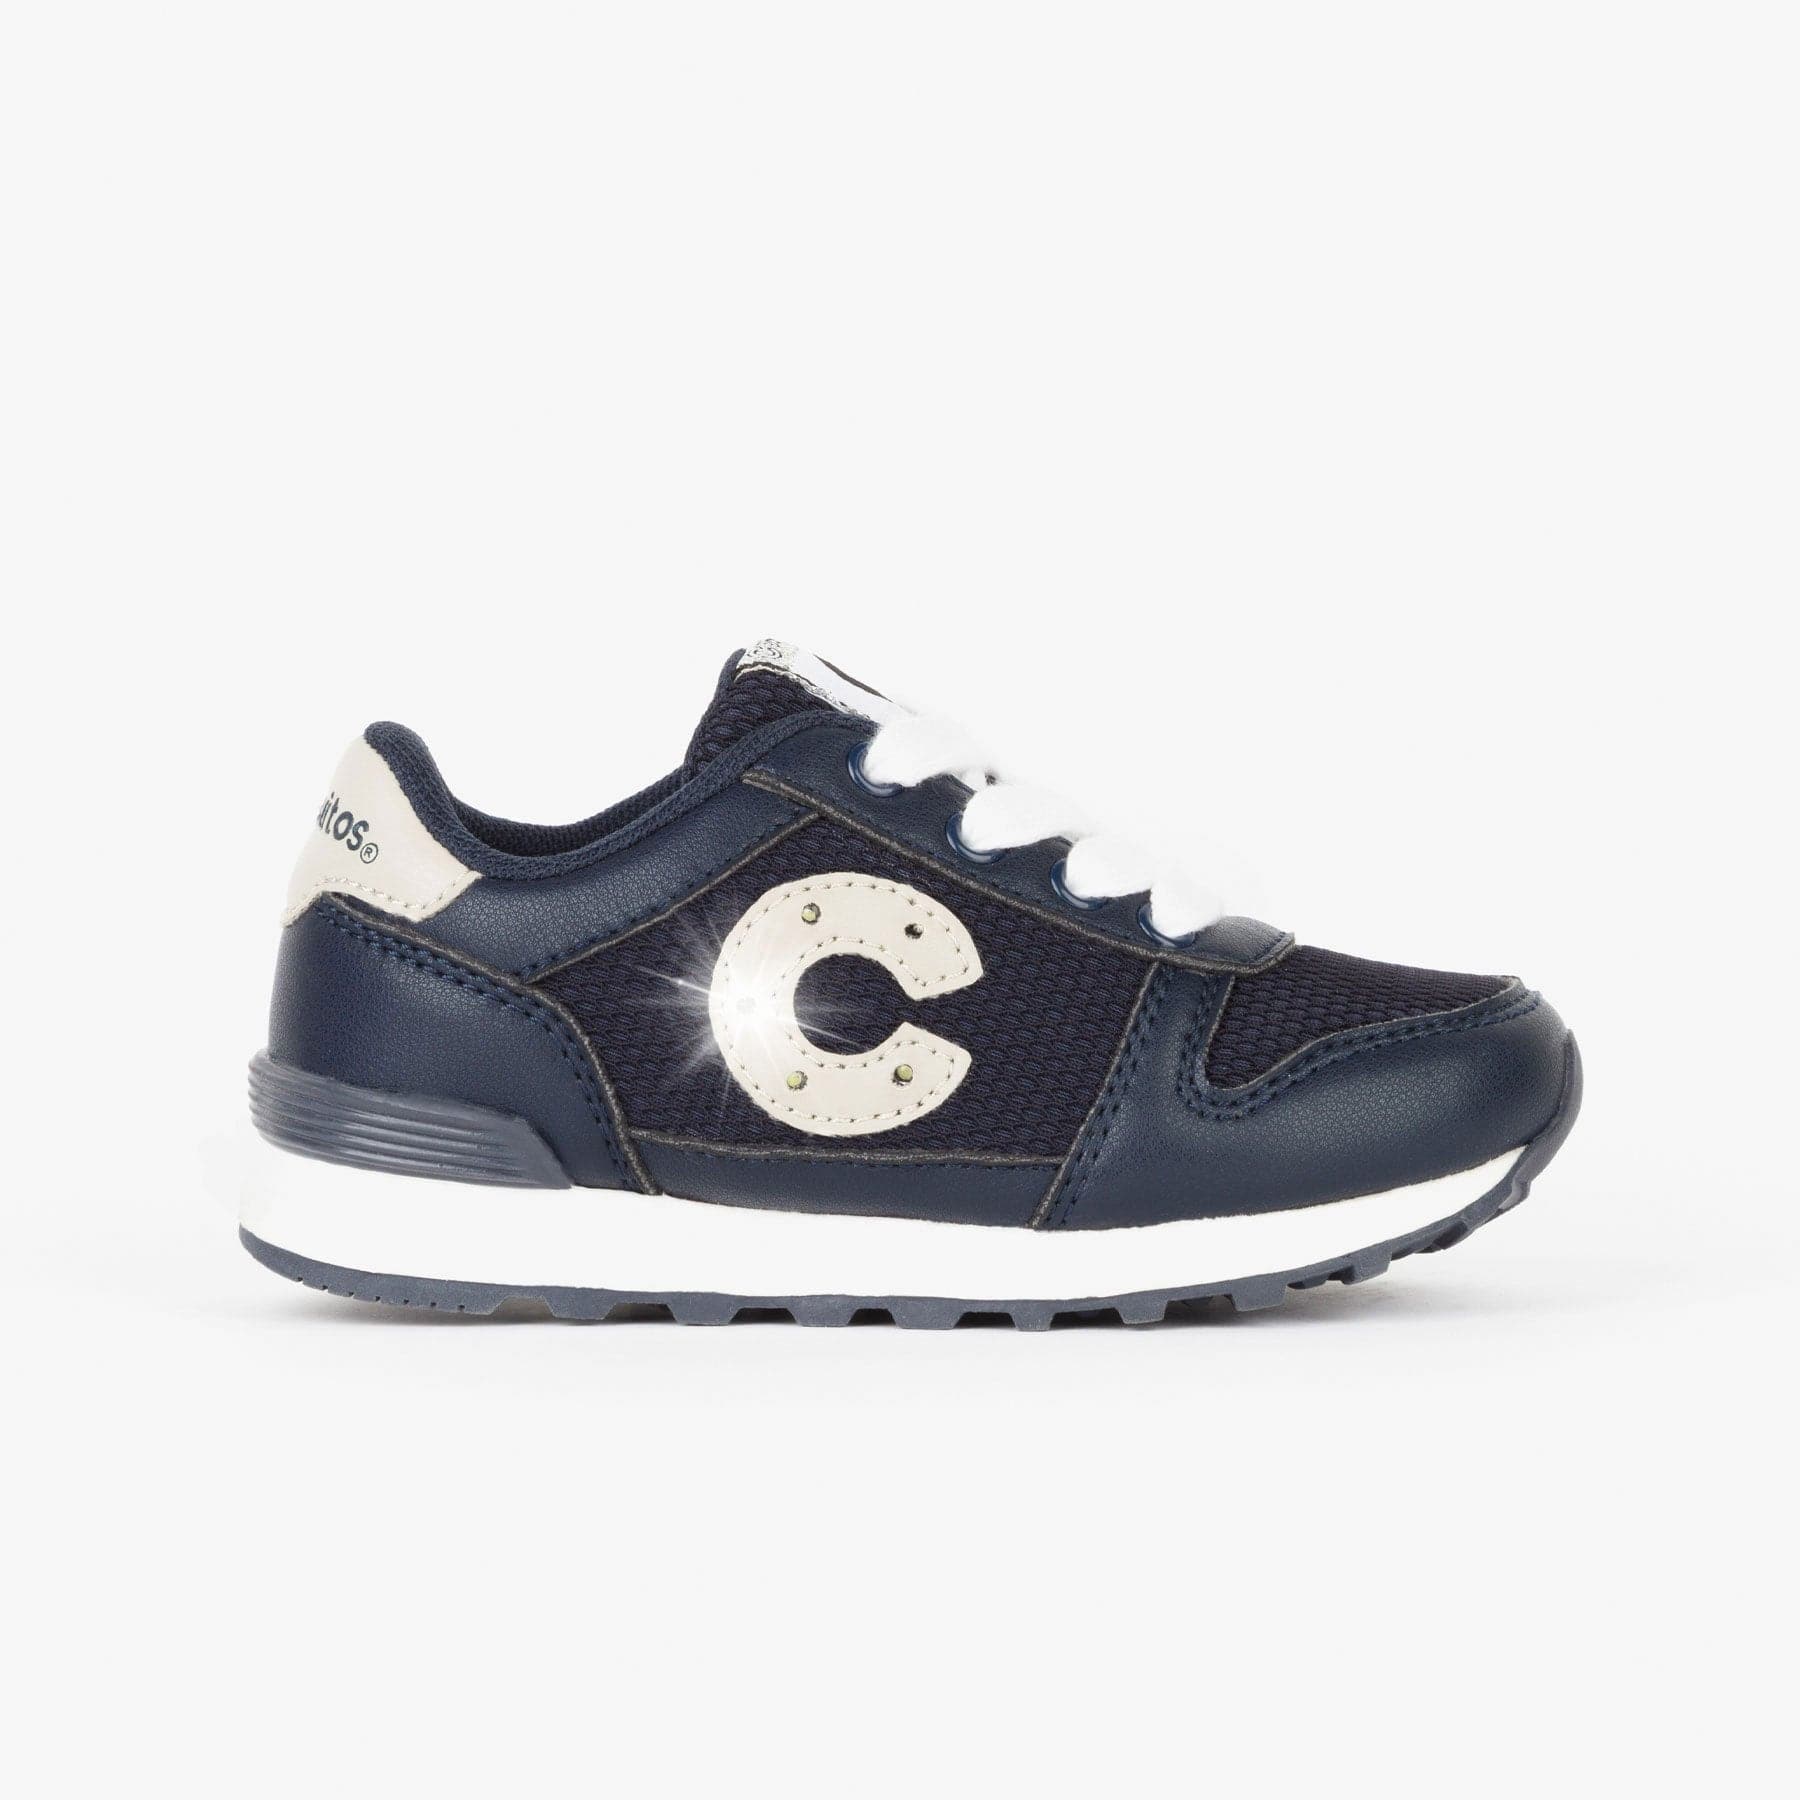 CONGUITOS Shoes Unisex sports with Light Blue Navy